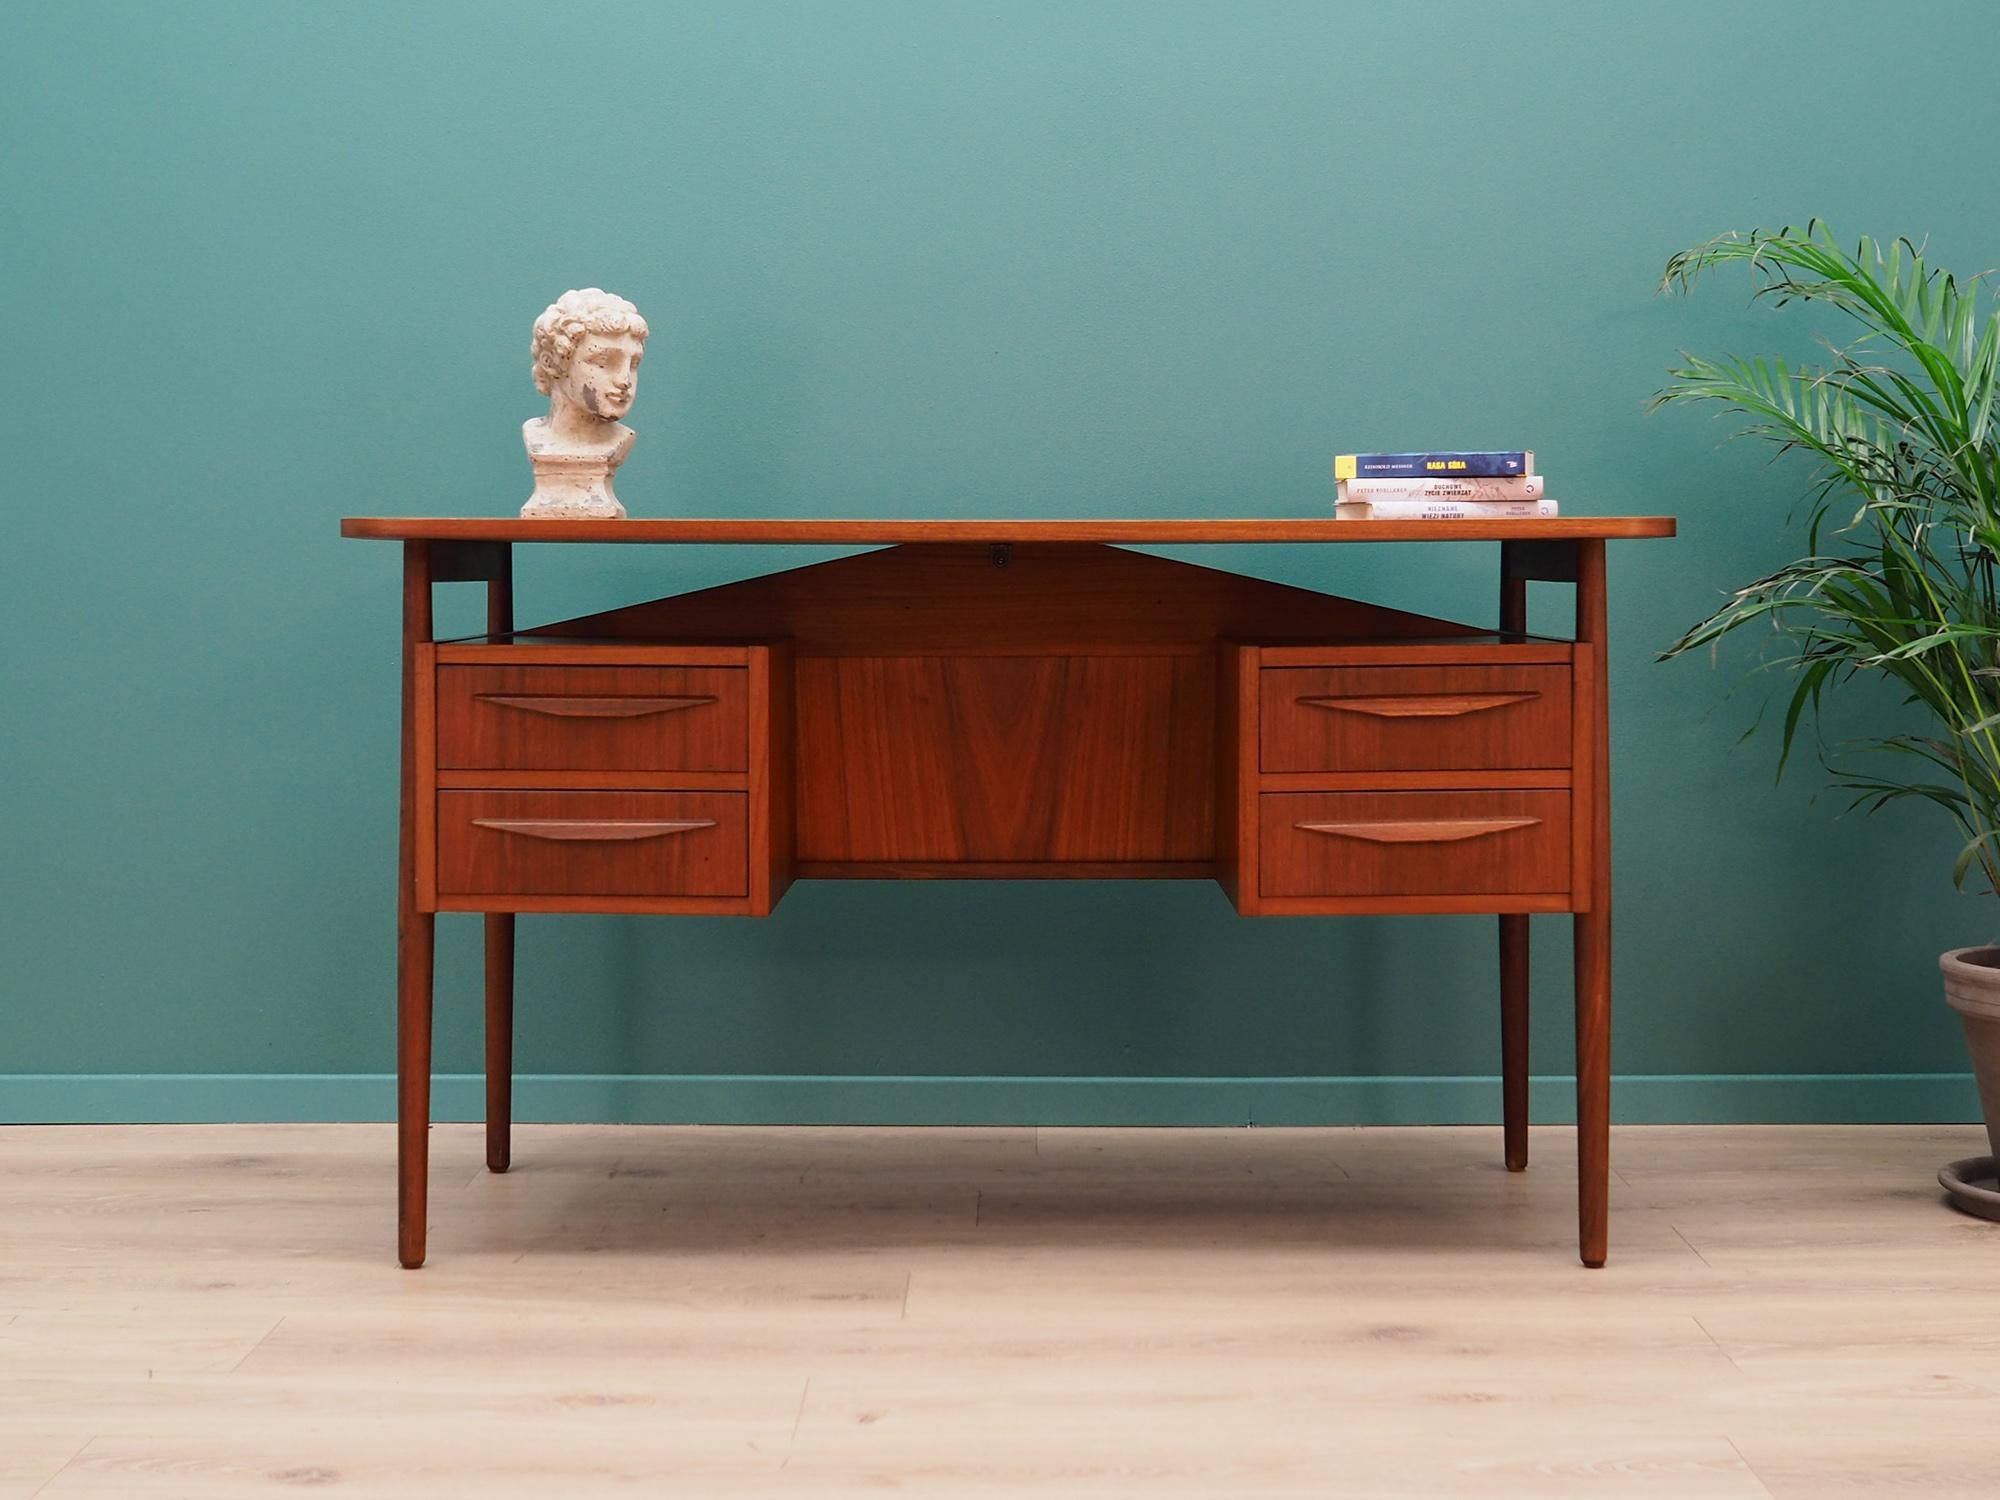 Fantastic desk from the 1960s-1970s. Scandinavian style, designed by Gunnar Nielsen Tibergaard. Top finished with teak veneer, construction made of solid teak wood. Desk with four drawers and a bookcase at the back. Preserved in good condition